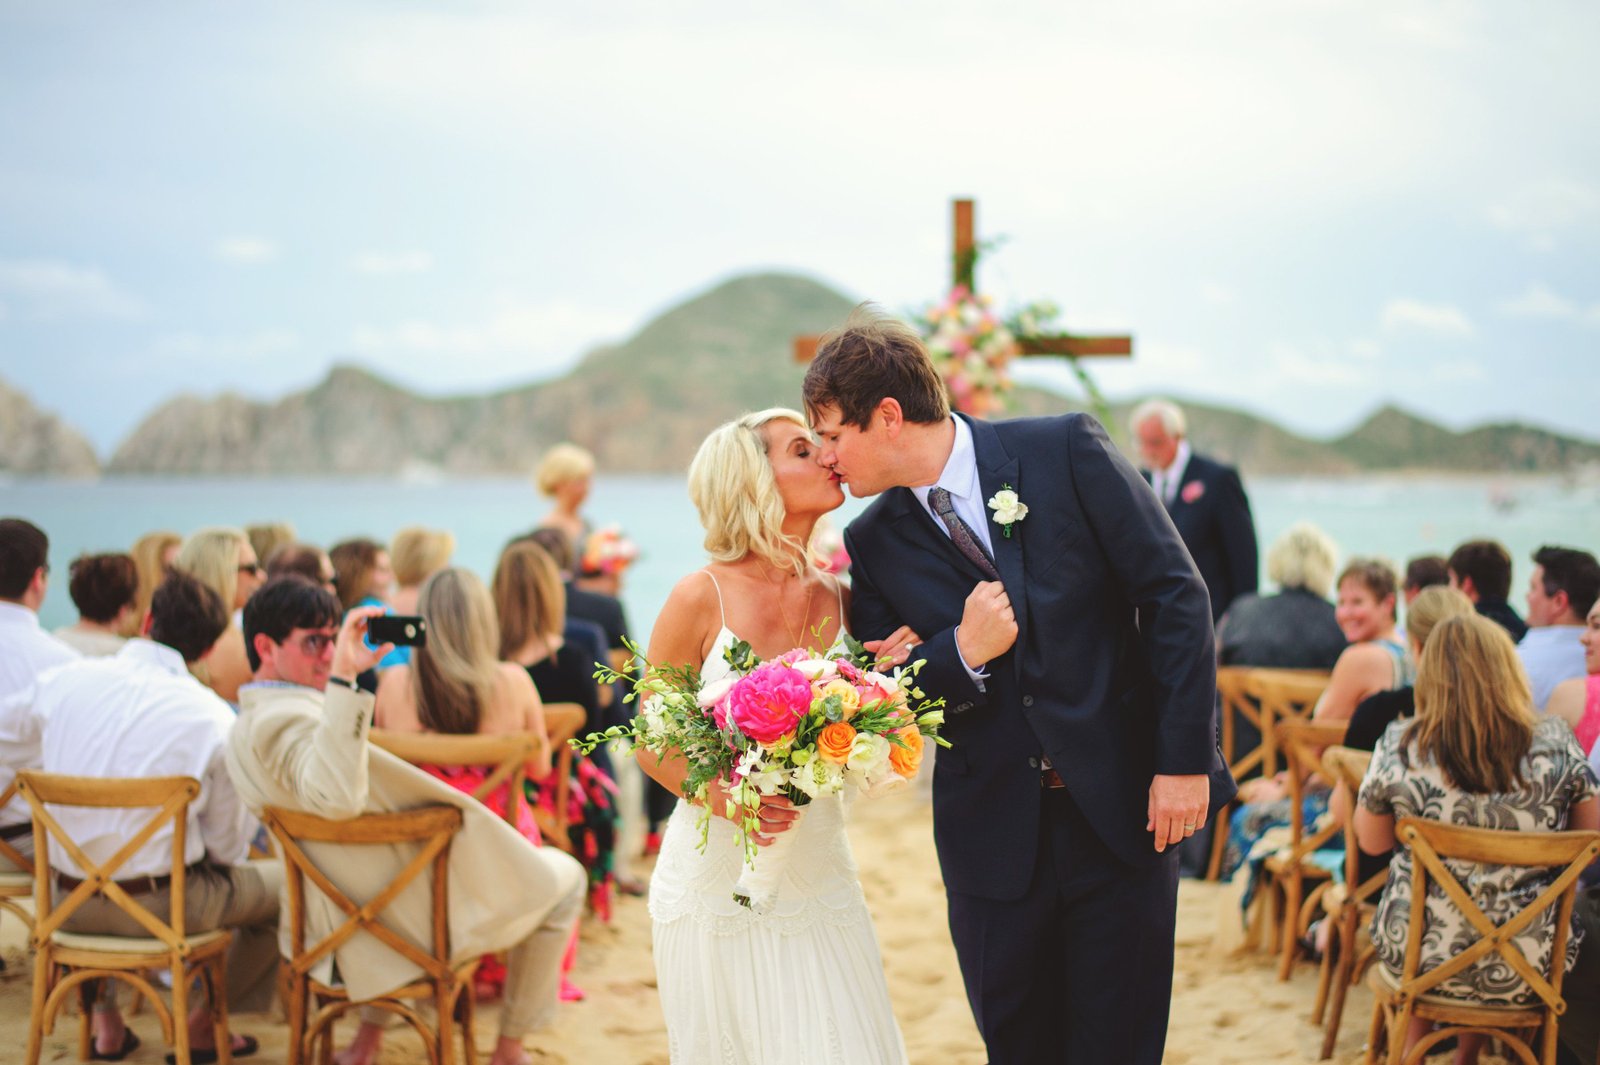 Just Married Newlyweds in Cabo San Lucas Ceremony Design by Jesse Wolff